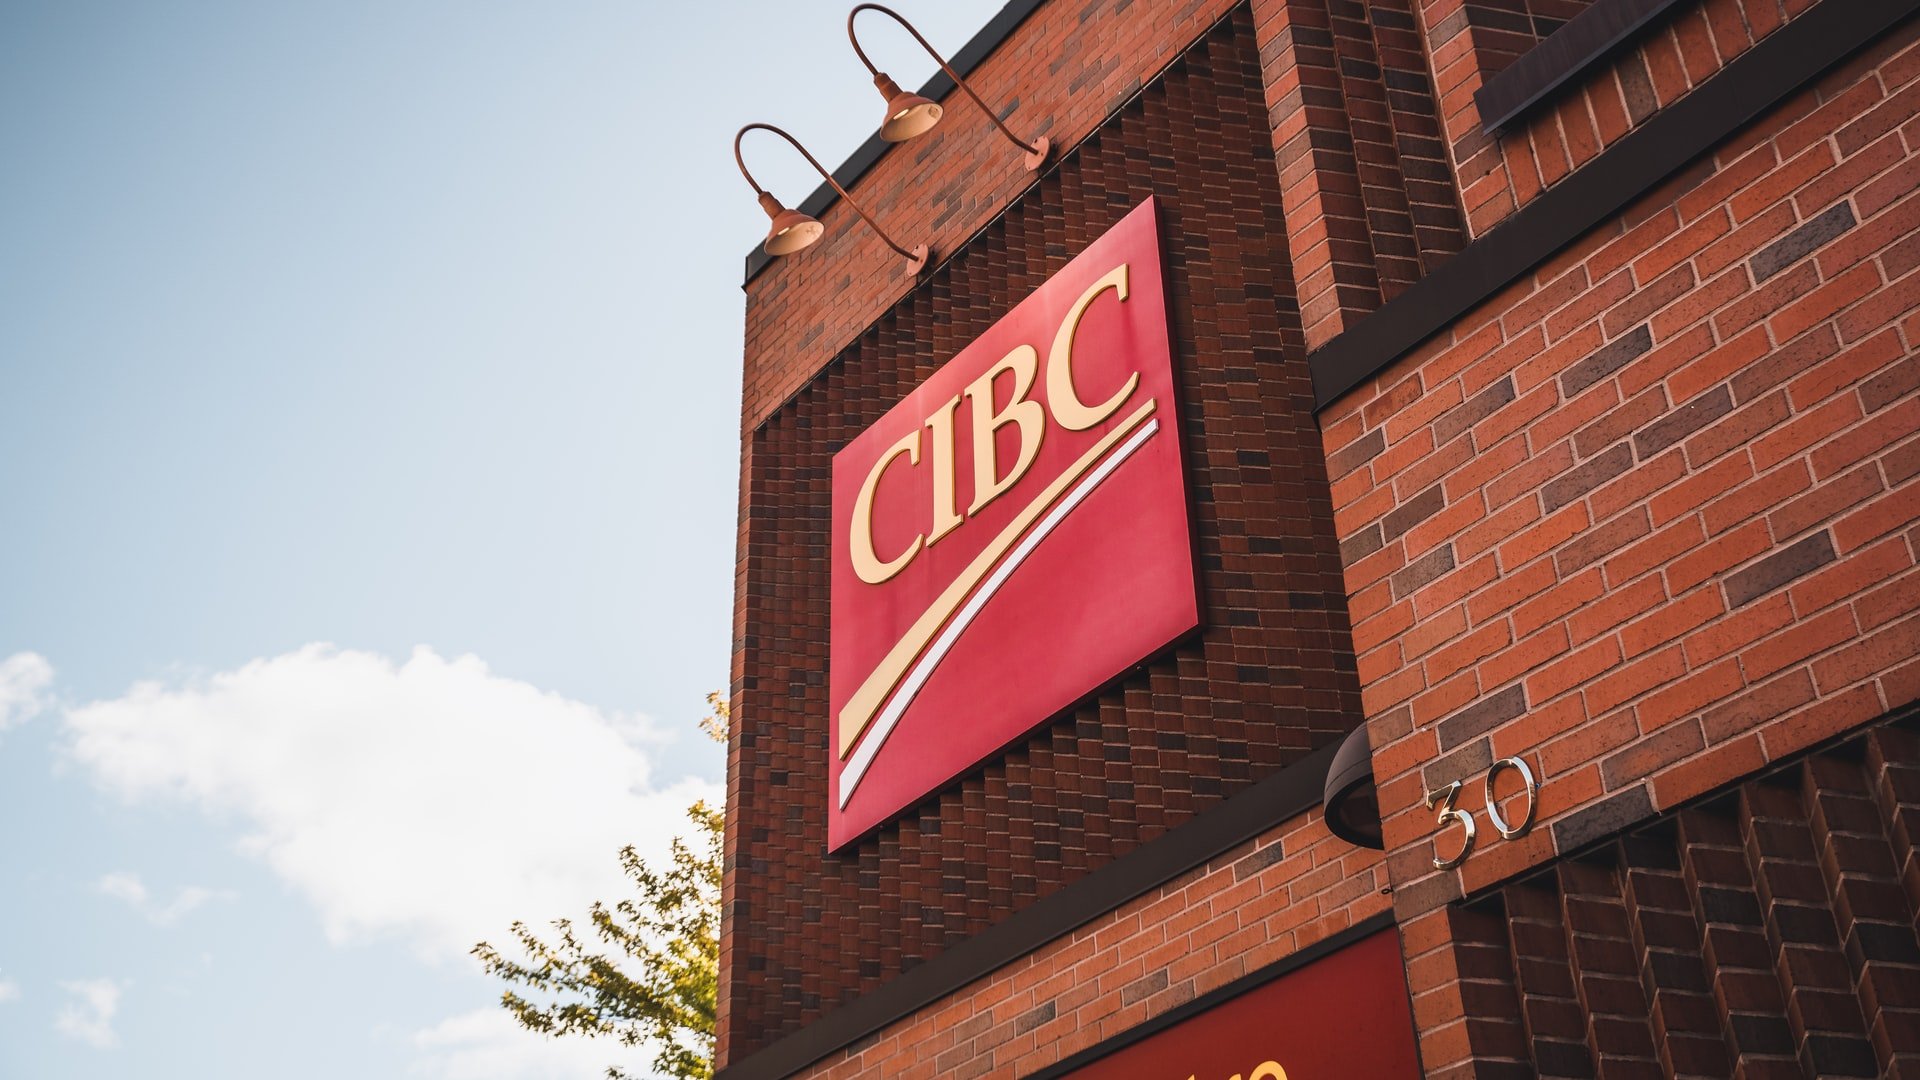 See how this CIBC card works! Source: Unsplash